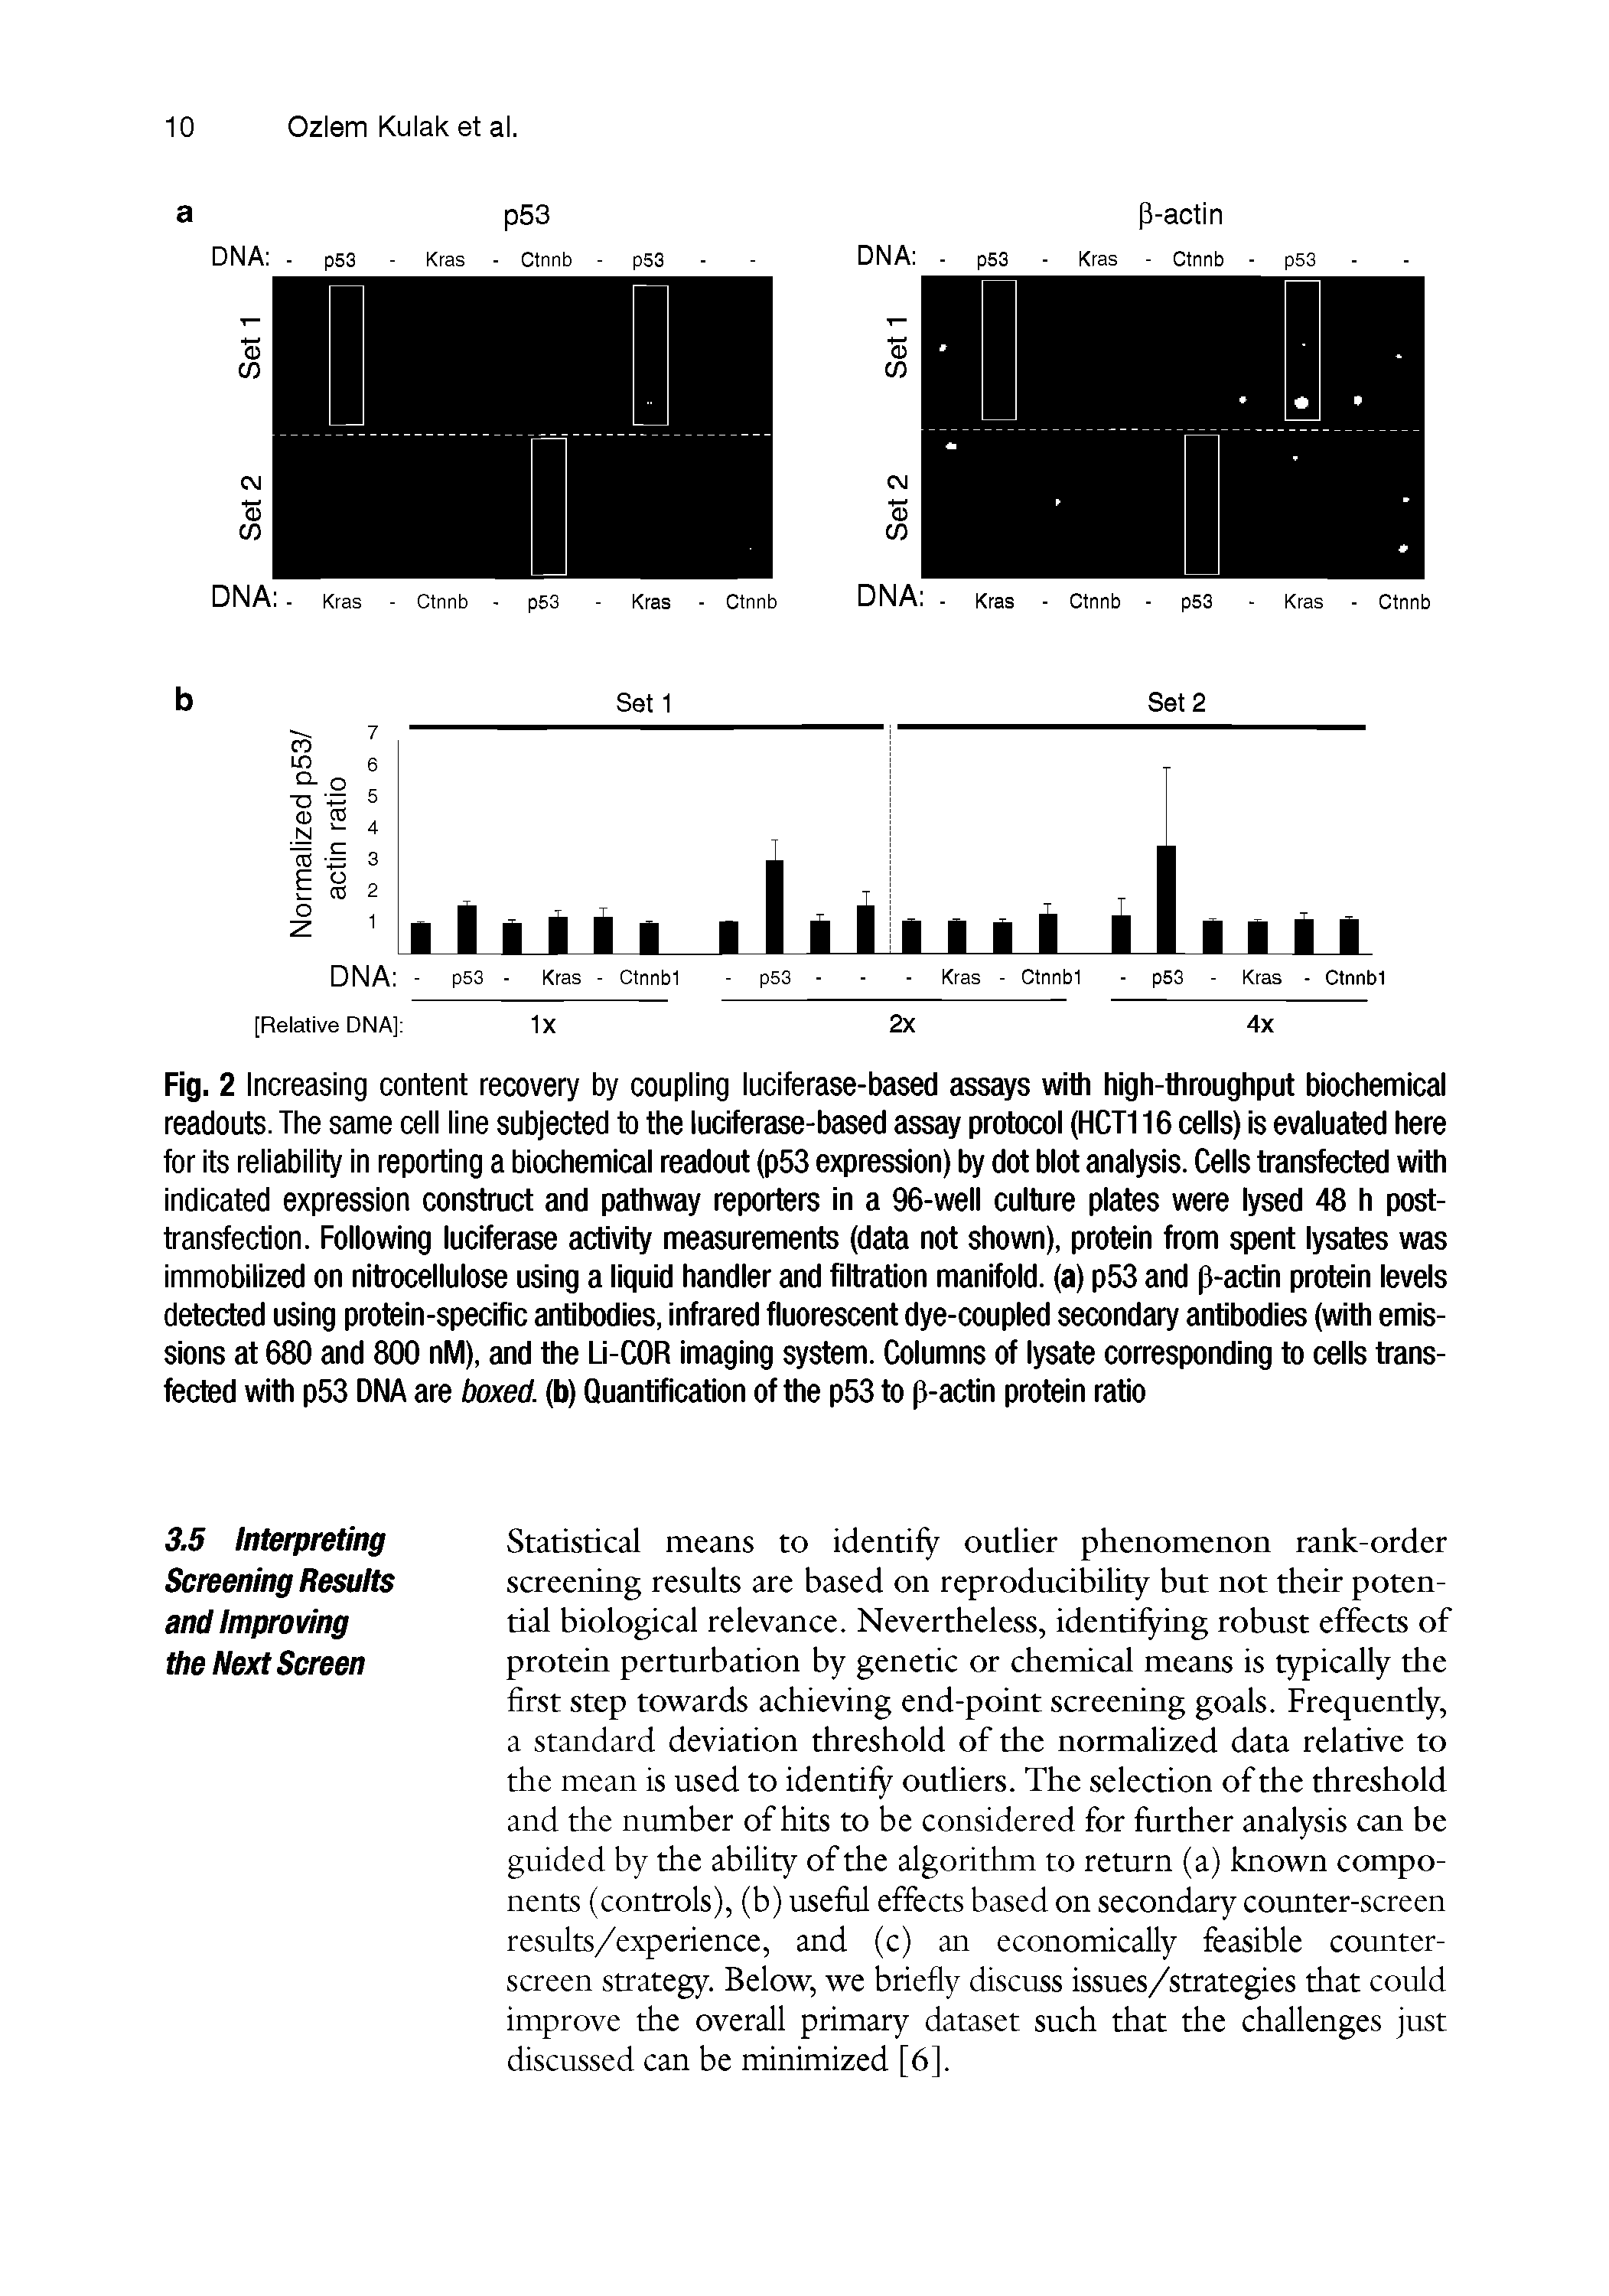 Fig. 2 Increasing content recovery by coupling luciferase-based assays with high-throughput biochemical readouts. The same cell line subjected to the luciferase-based assay protocol (HCT116 cells) is evaluated here for its reliability In reporting a biochemical readout (p53 expression) by dot blot analysis. Cells transfected with indicated expression construct and pathway reporters in a 96-well culture plates were lysed 48 h posttransfection. Following luciferase activity measurements (data not shown), protein from spent lysates was immobilized on nitrocellulose using a liquid handler and filtration manifold, (a) p53 and p-actin protein levels detected using protein-specific antibodies, infrared fluorescent dye-coupled secondary antibodies (with emissions at 680 and 800 nM), and the Li-COR imaging system. Columns of lysate corresponding to cells transfected with p53 DNA are boxed, (b) Quantification of the p53 to p-actin protein ratio...